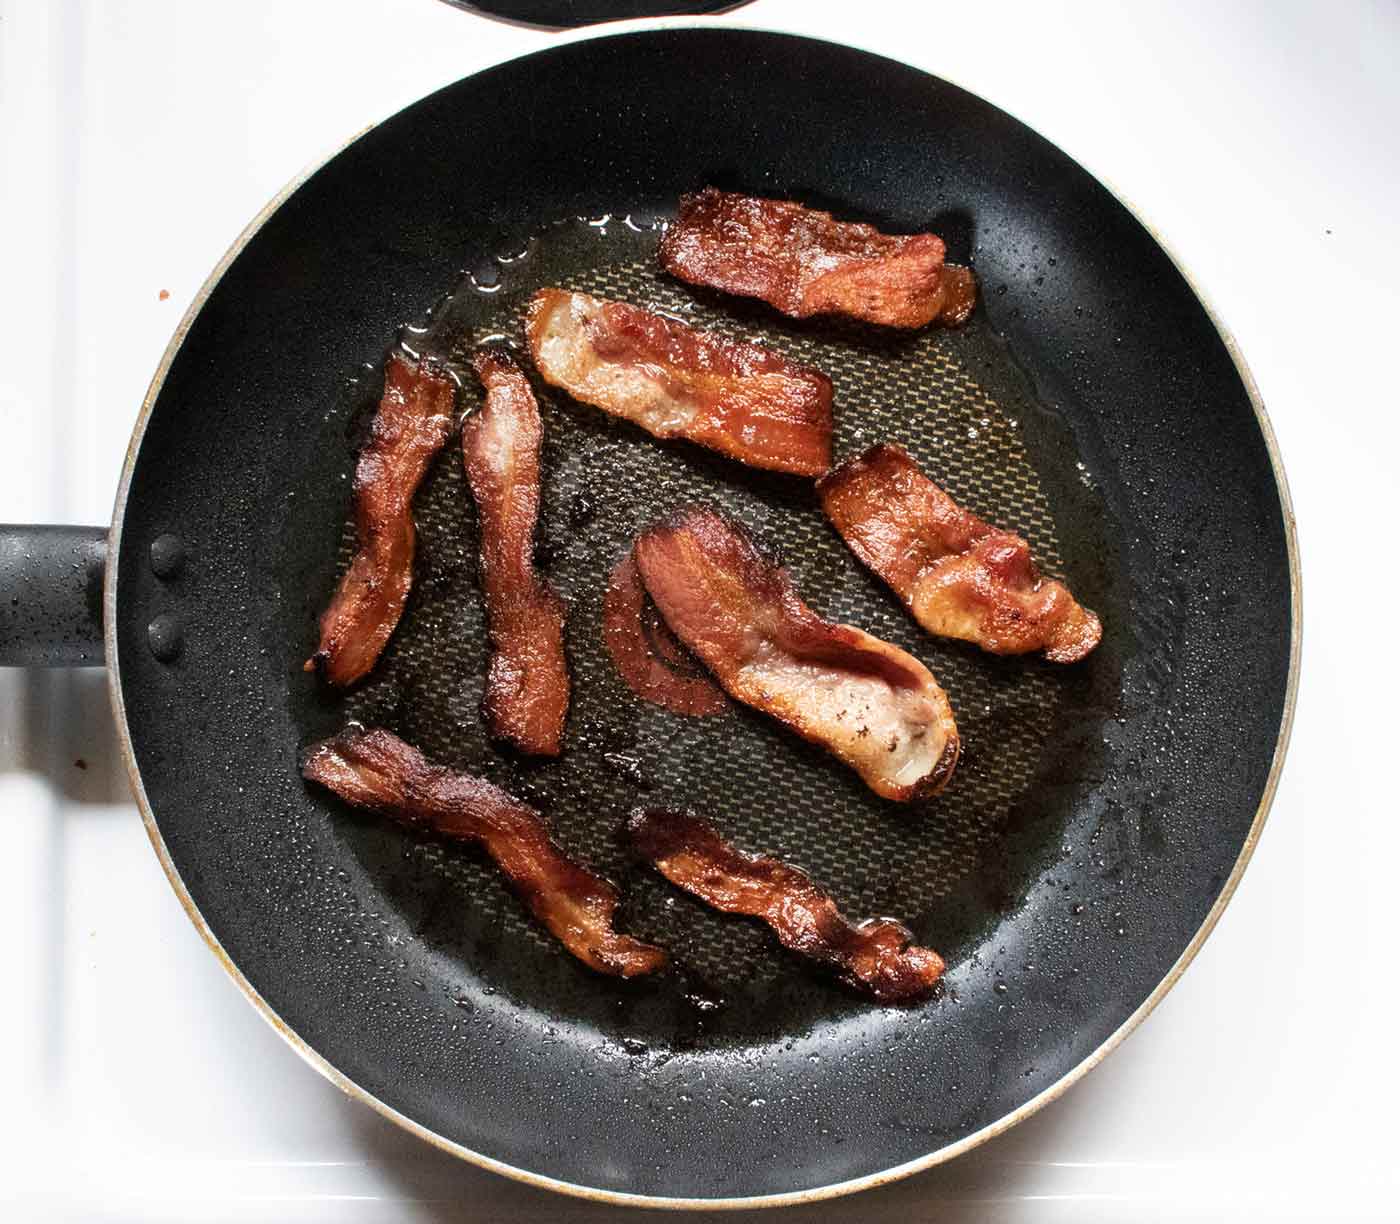 Step 1: Strips of bacon cooking in a skillet.